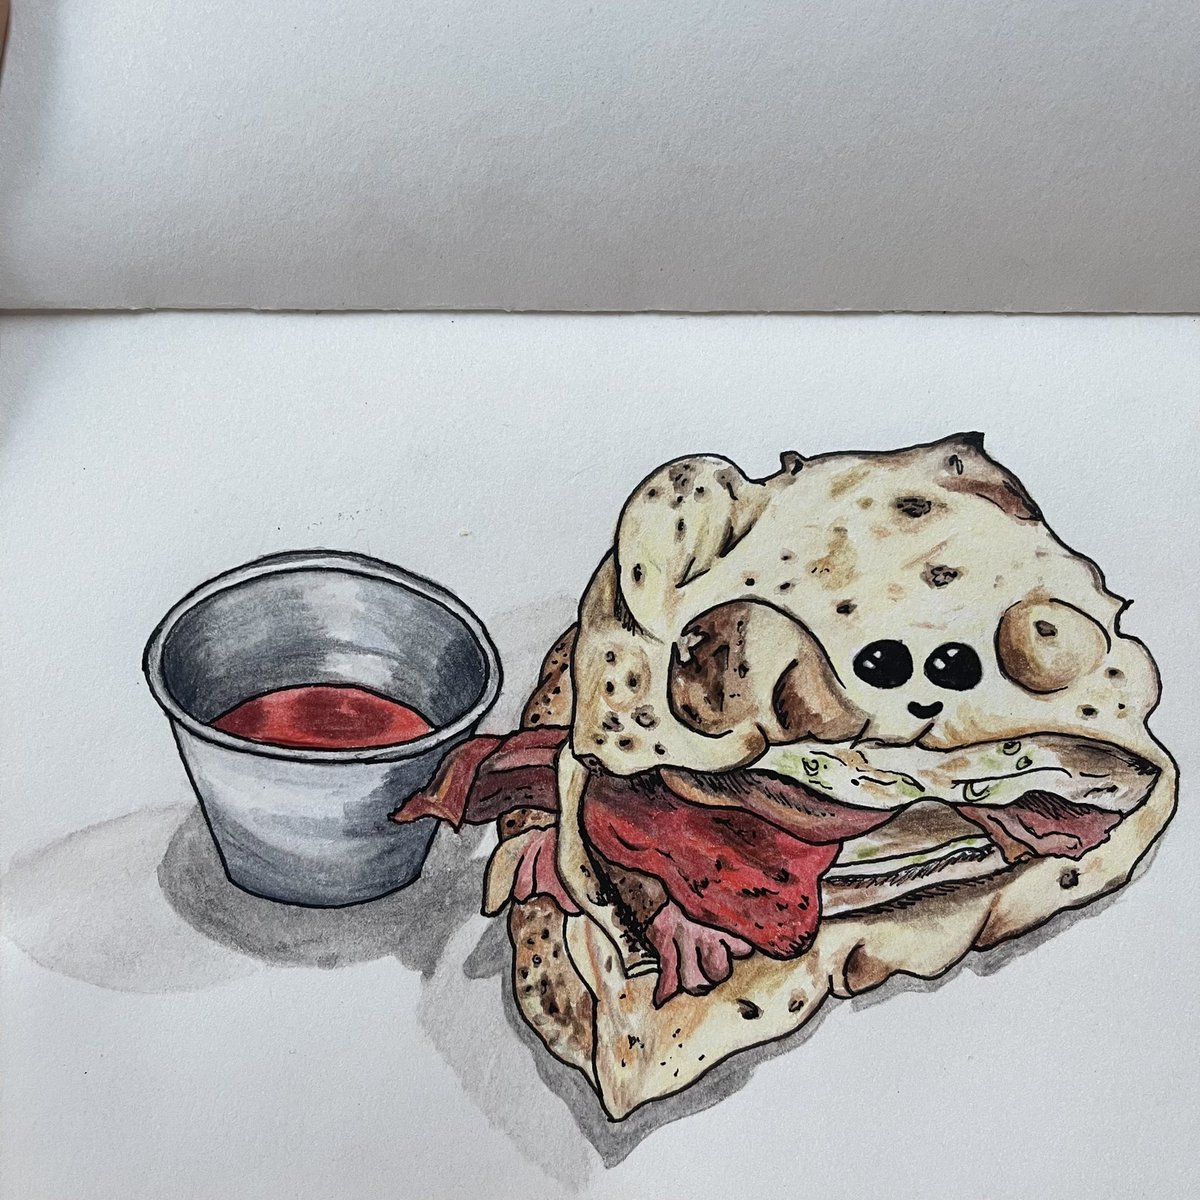 Today’s Sketching Sunday is brought to you by a bacon & egg naan roll 🫓 from @dishoom from when @bristoleating and I went to Manchester last week to see @kulashakerofficial at @alberthallmcr #naanroll #lucysparrow #eggandbacon #naanbread #dishoom #ketchup #sketching  #drawing